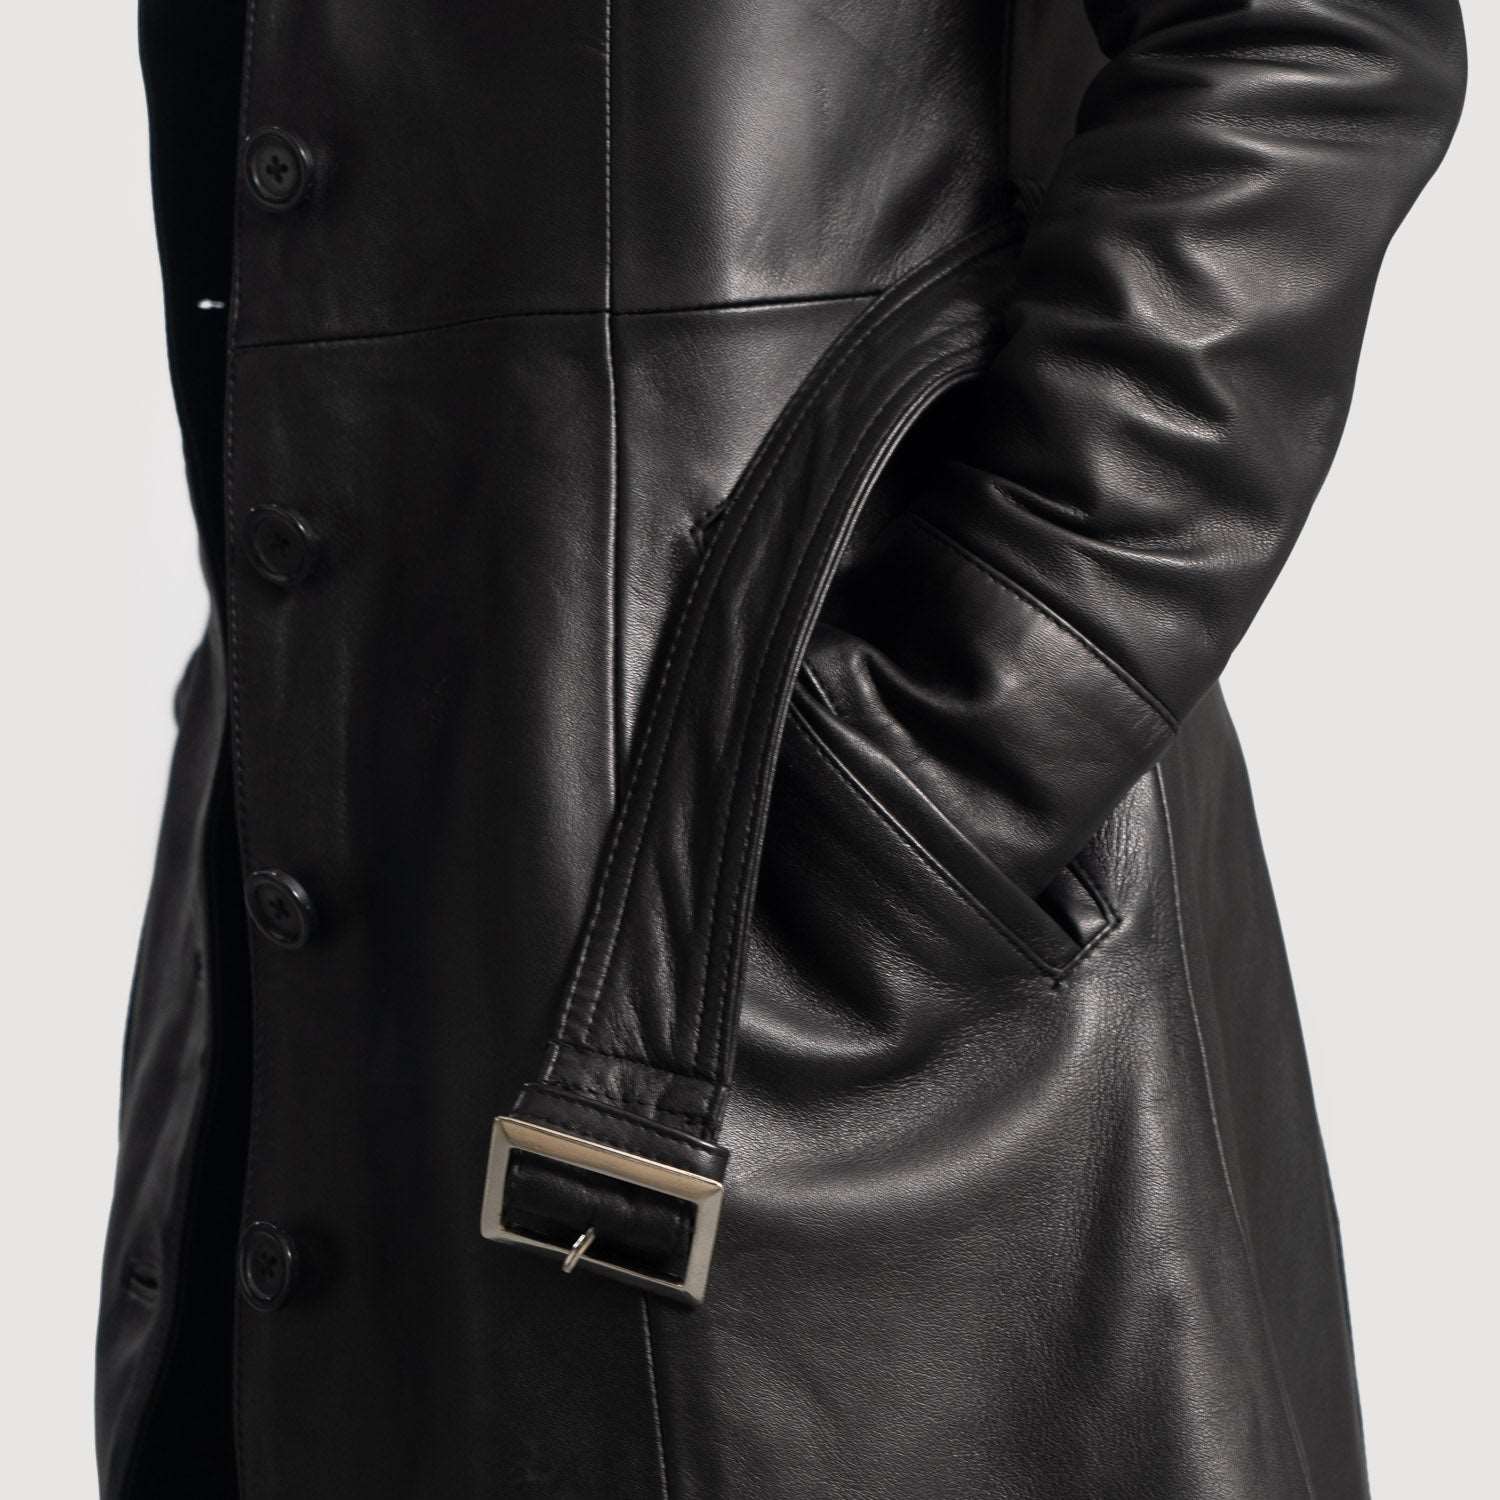 Womens Moon light Black Leather Trench Coat Full Length Women's Black Leather Trench Coat Full Length, Full Length Black Leather Coat for Women, Women's Leather Trench Coat, Stylish Women's Leather Trench Coat, Premium Quality Women's Leather Coat, Elegant Women's Leather Outerwear, Classic Women's Leather Coat